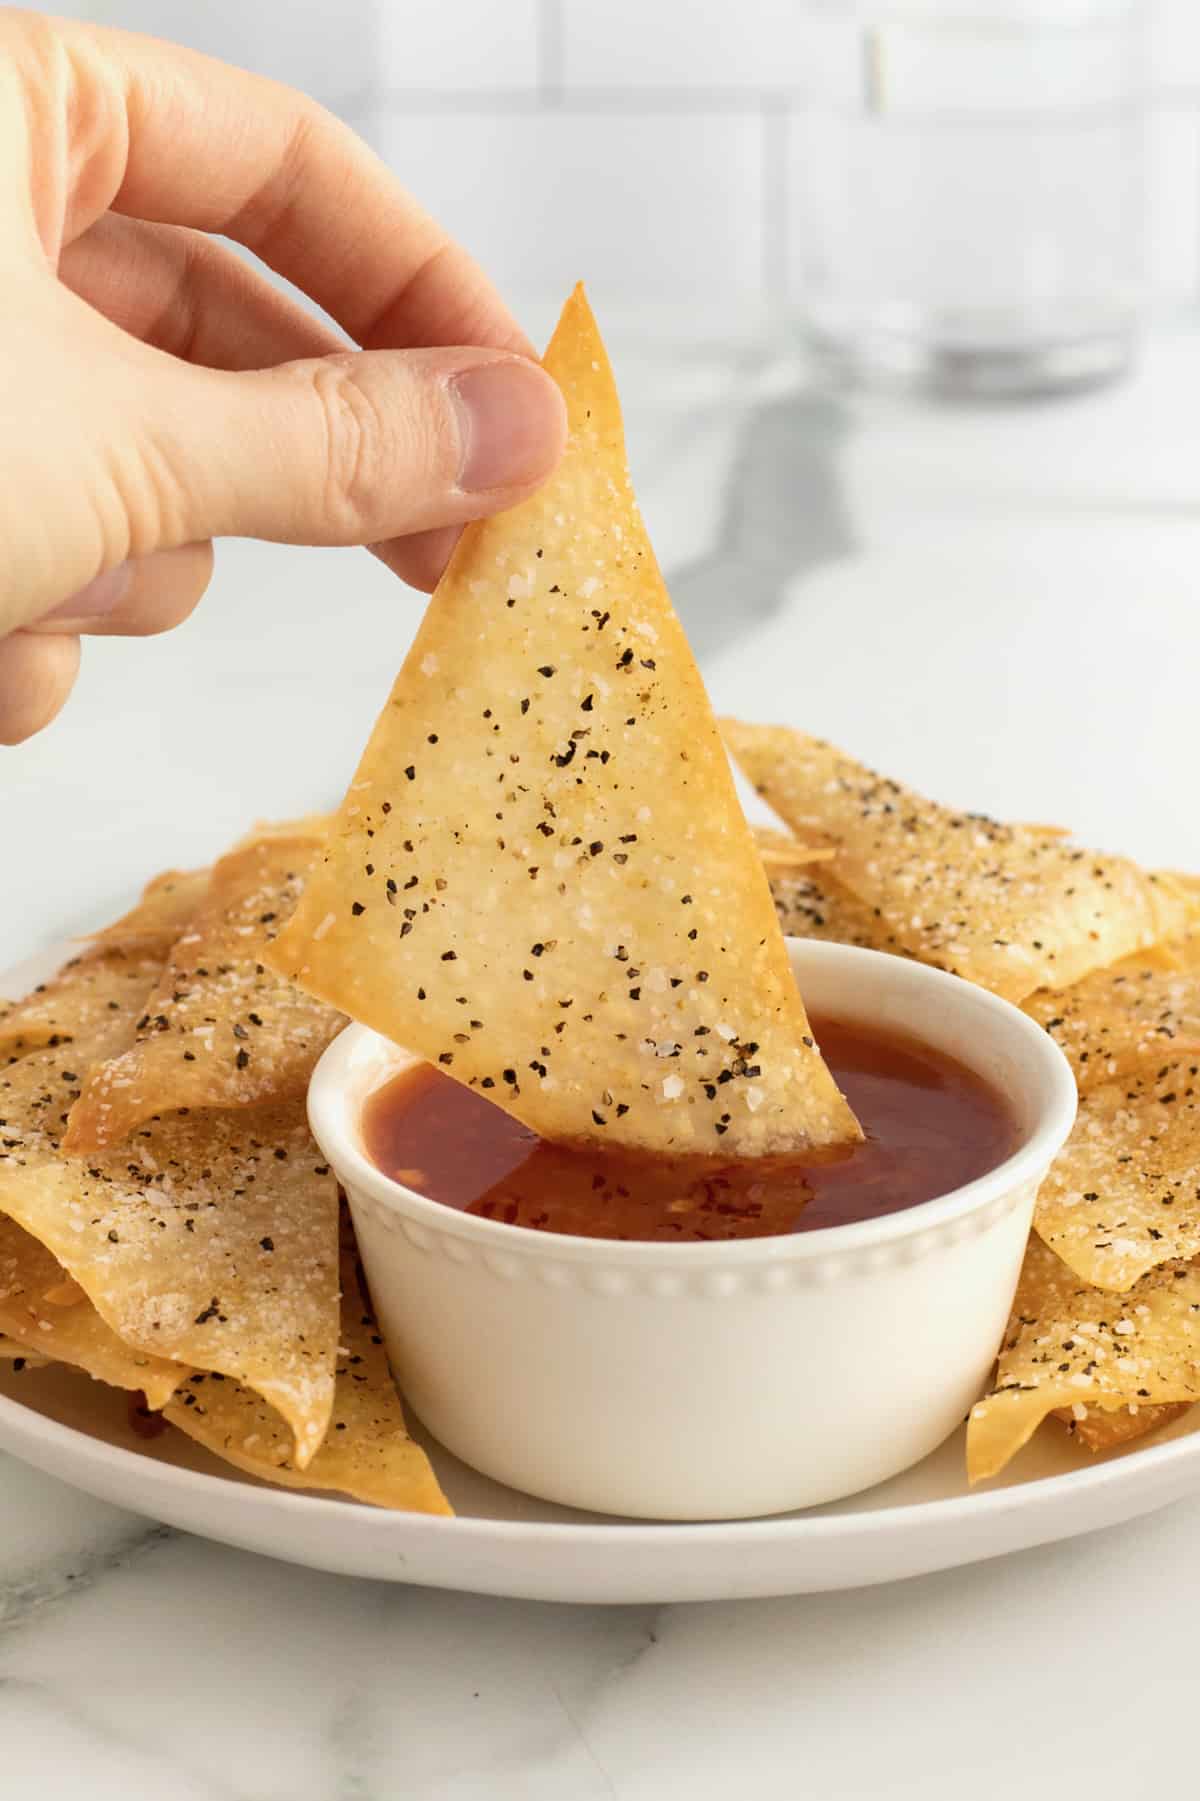 Baked Wonton Chips by The BakerMama